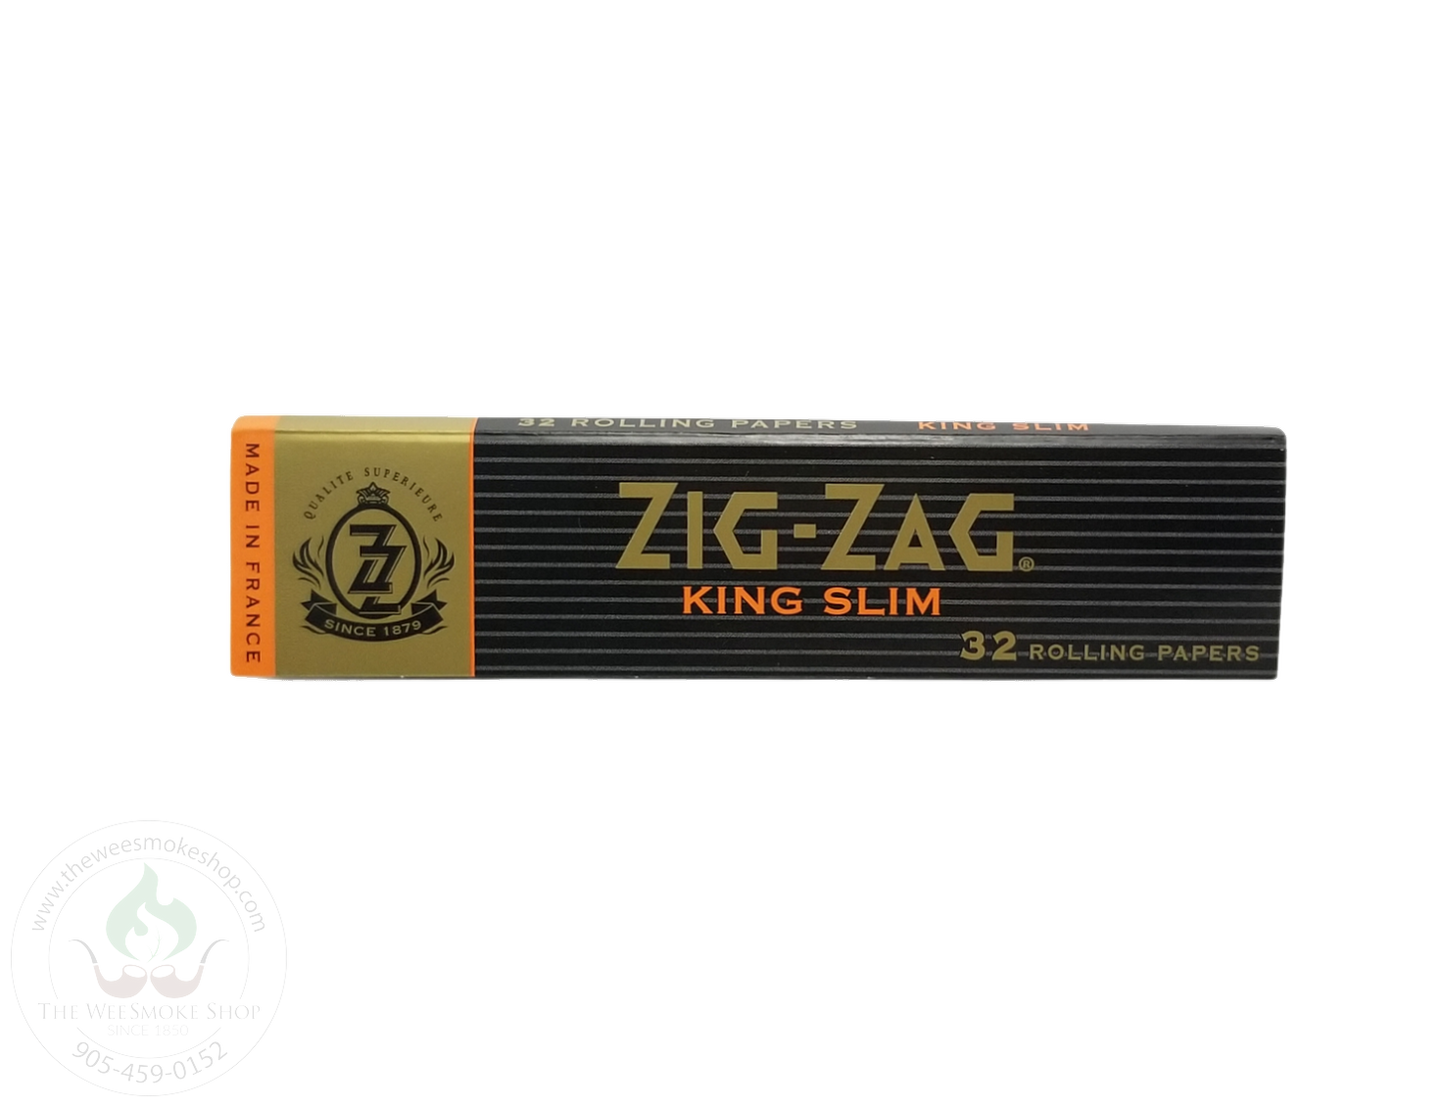 Zig Zag Orange Rolling Papers-rolling papers. King size slim. Pack of 32 papers.